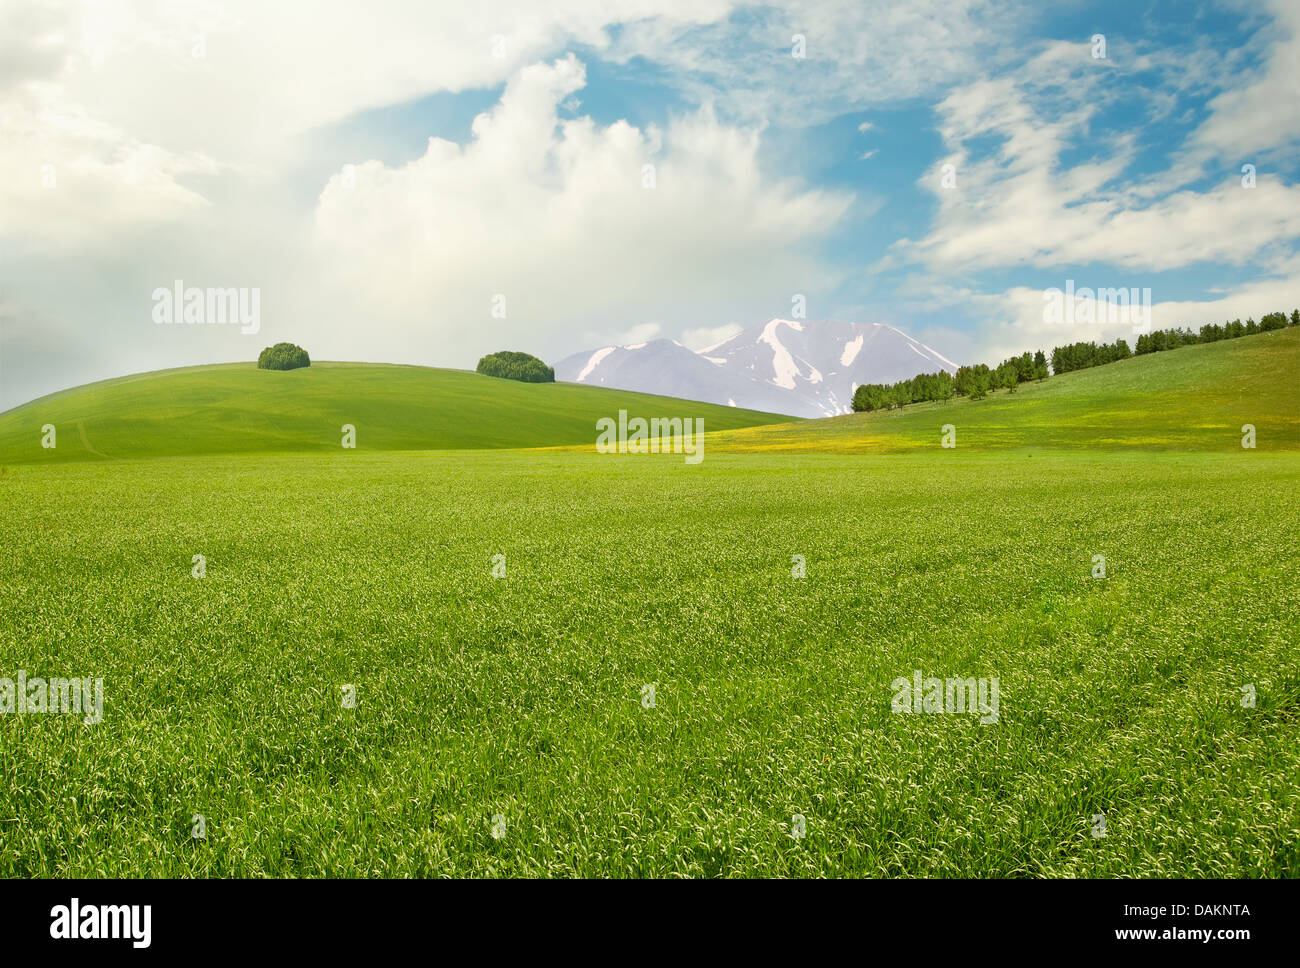 Peaceful landscape with meadow, hills, mountains and sky Stock Photo